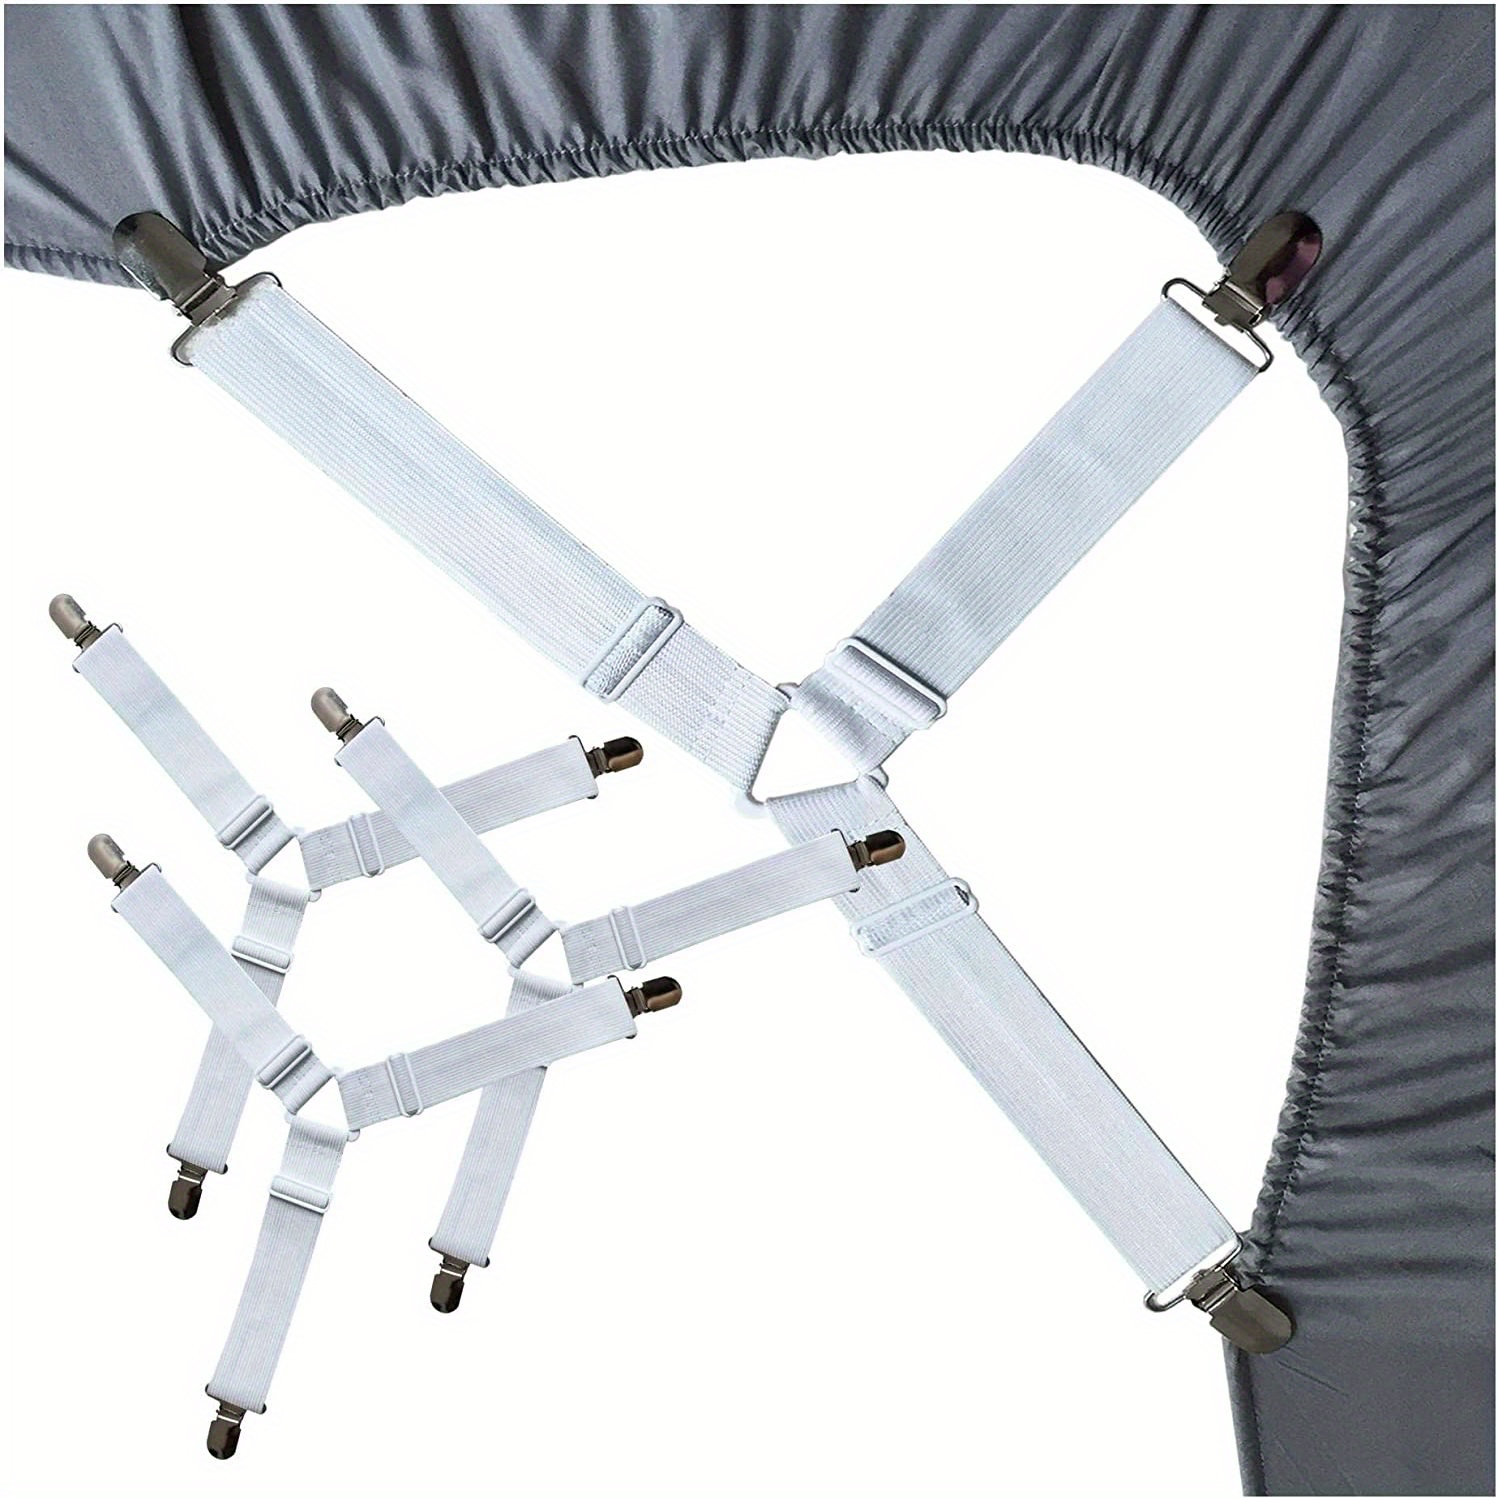 1PC Bed Sheet Holder Straps Sheet Keepers Straps Bedsheet Holders  Suspenders Mattress Cover Straps Bed Sheet Corners Fasteners Clips Keep  Mattress